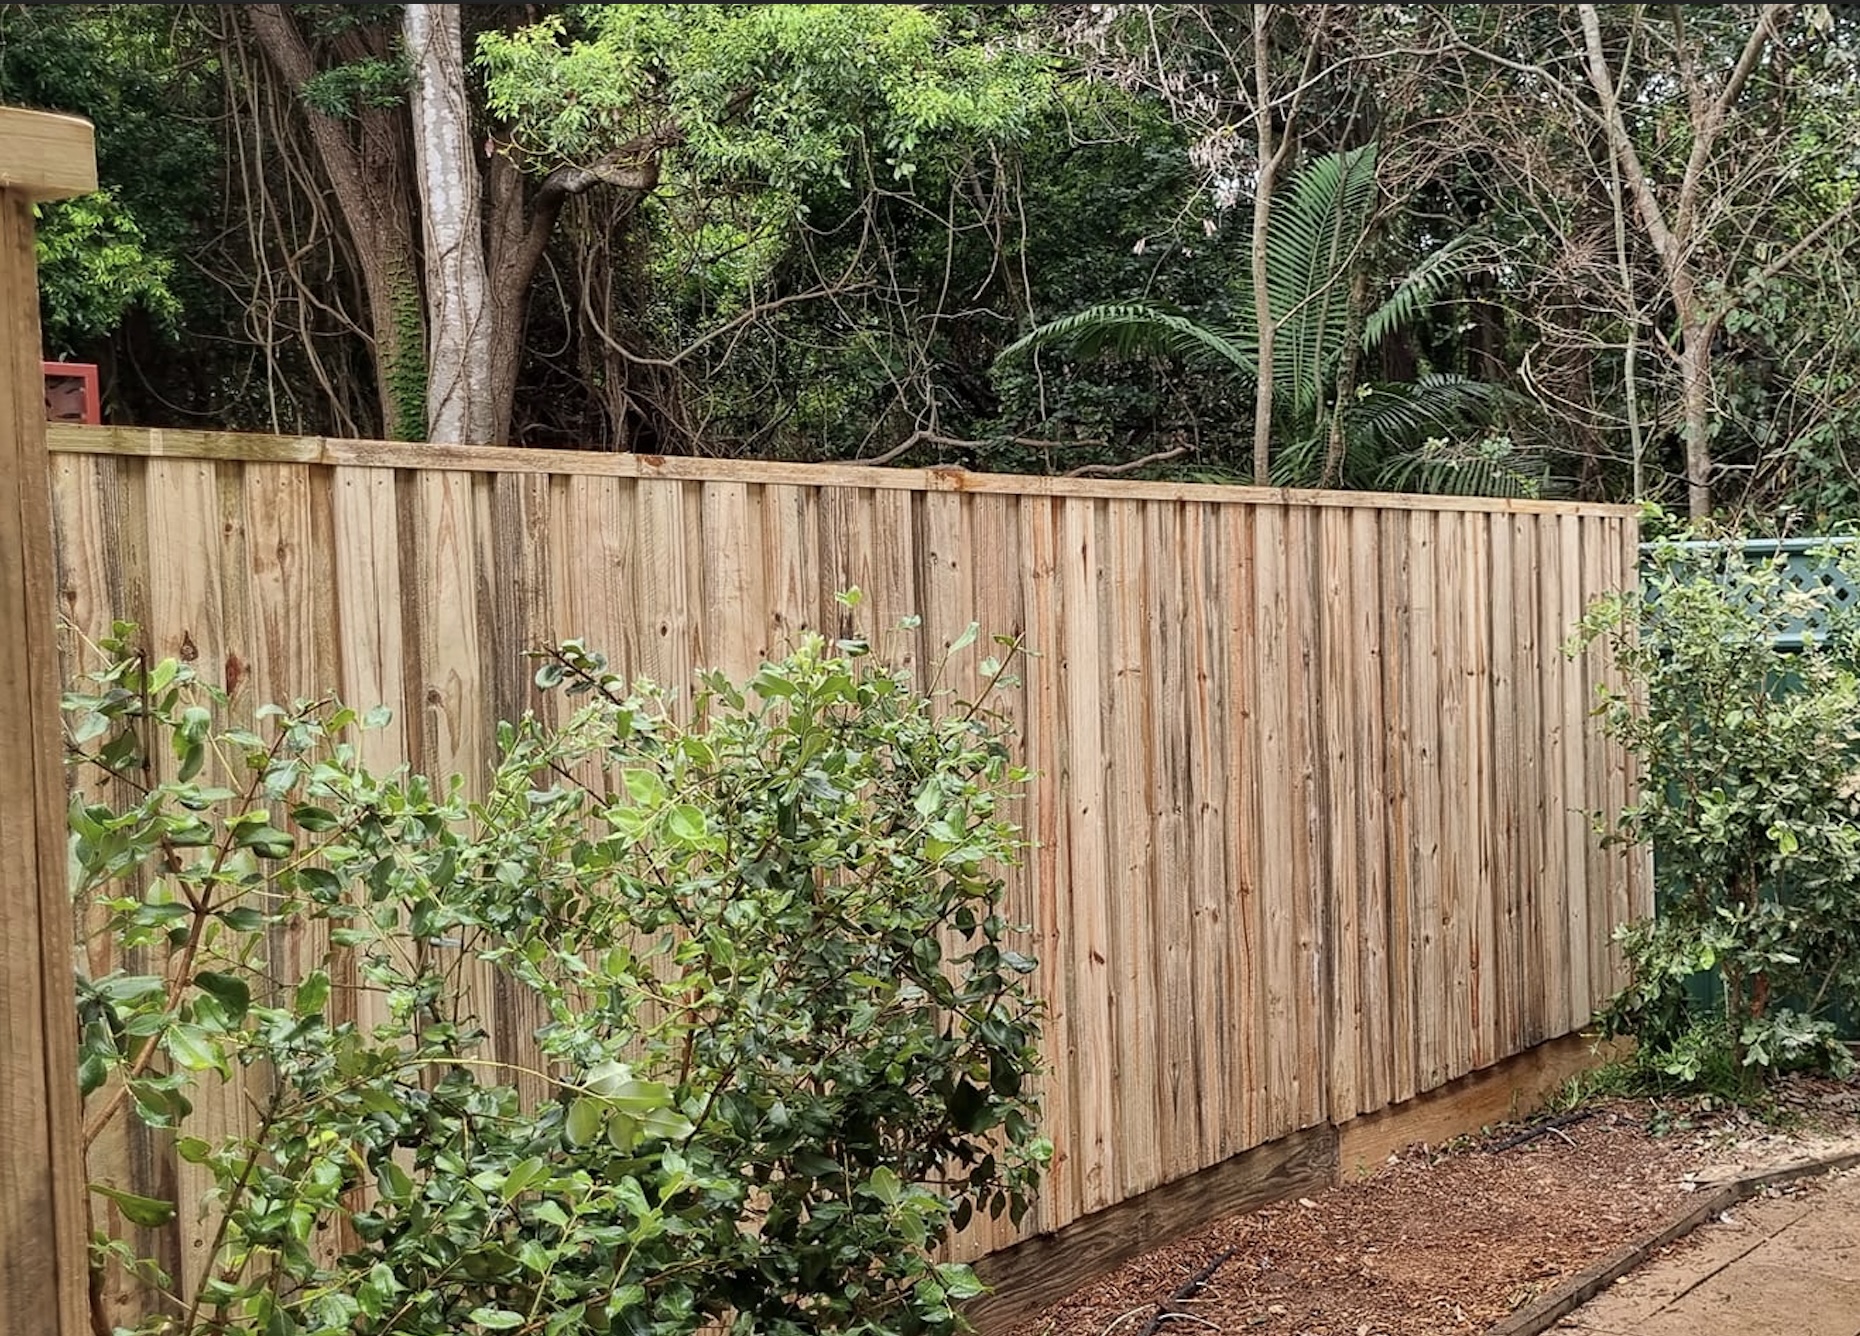 Lapped and capped pine paling wood fence in australian backyard. bushes slightly obscuring view of fence